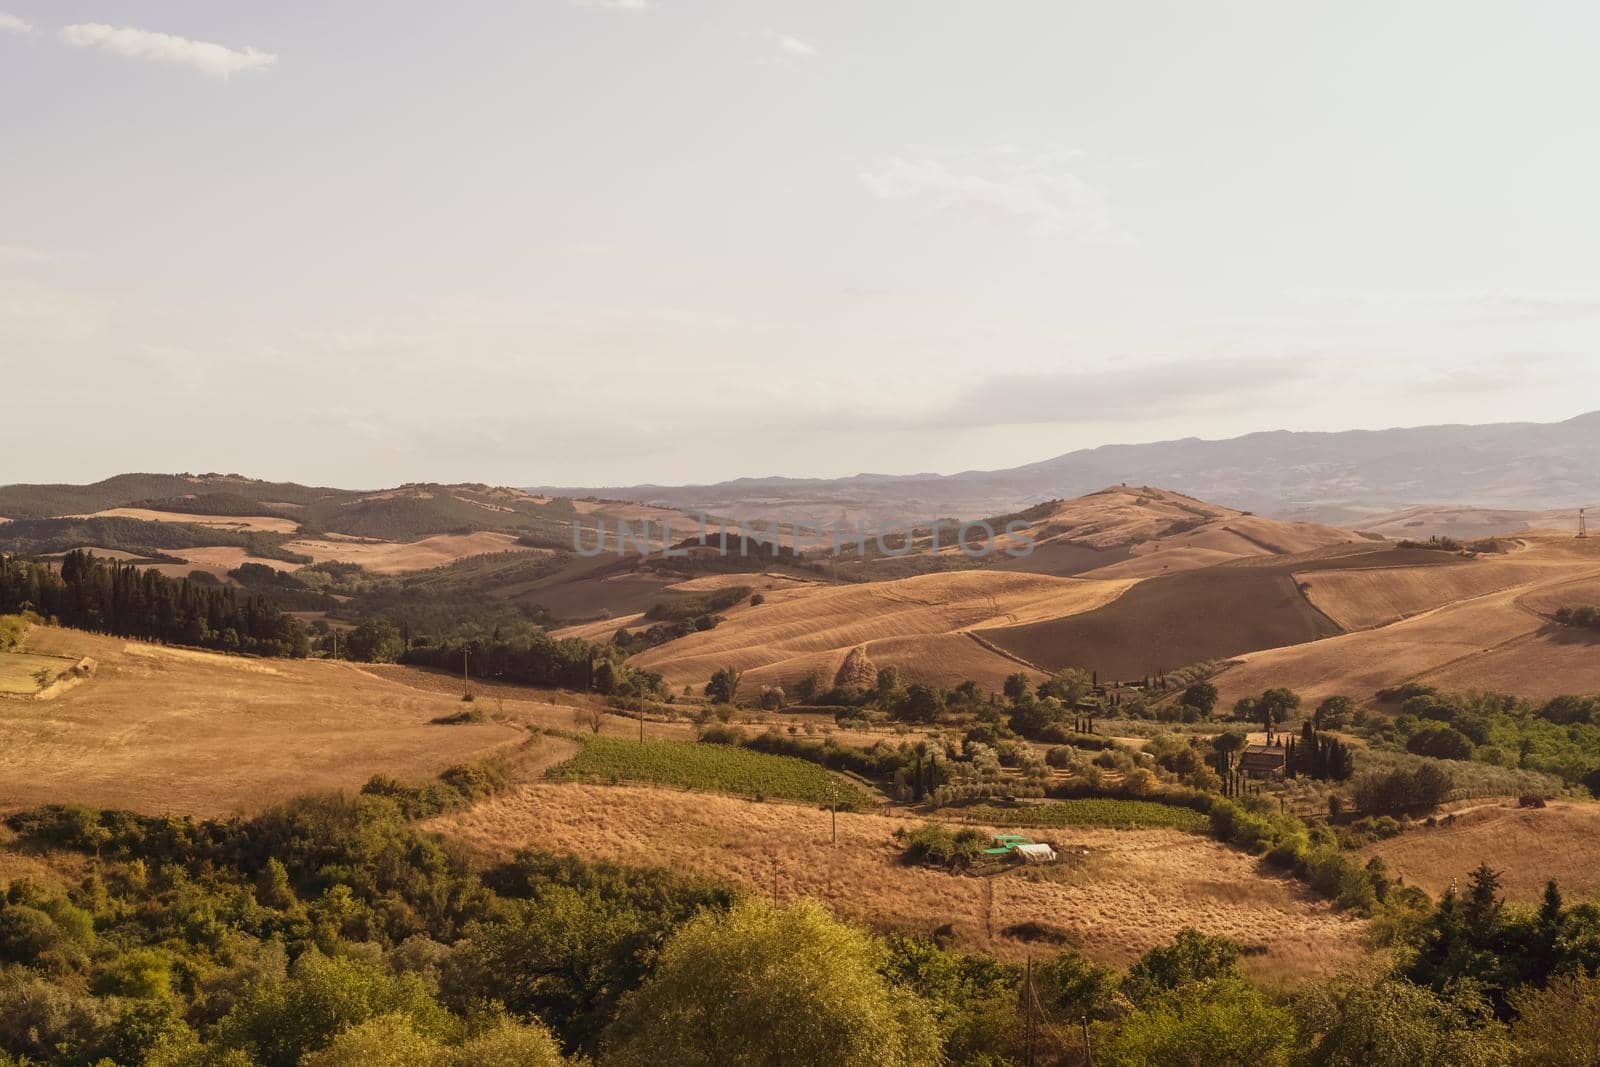 Panoramic view of the Tuscan countryside with the characteristic colors of its hills, Tuscany, Italy.